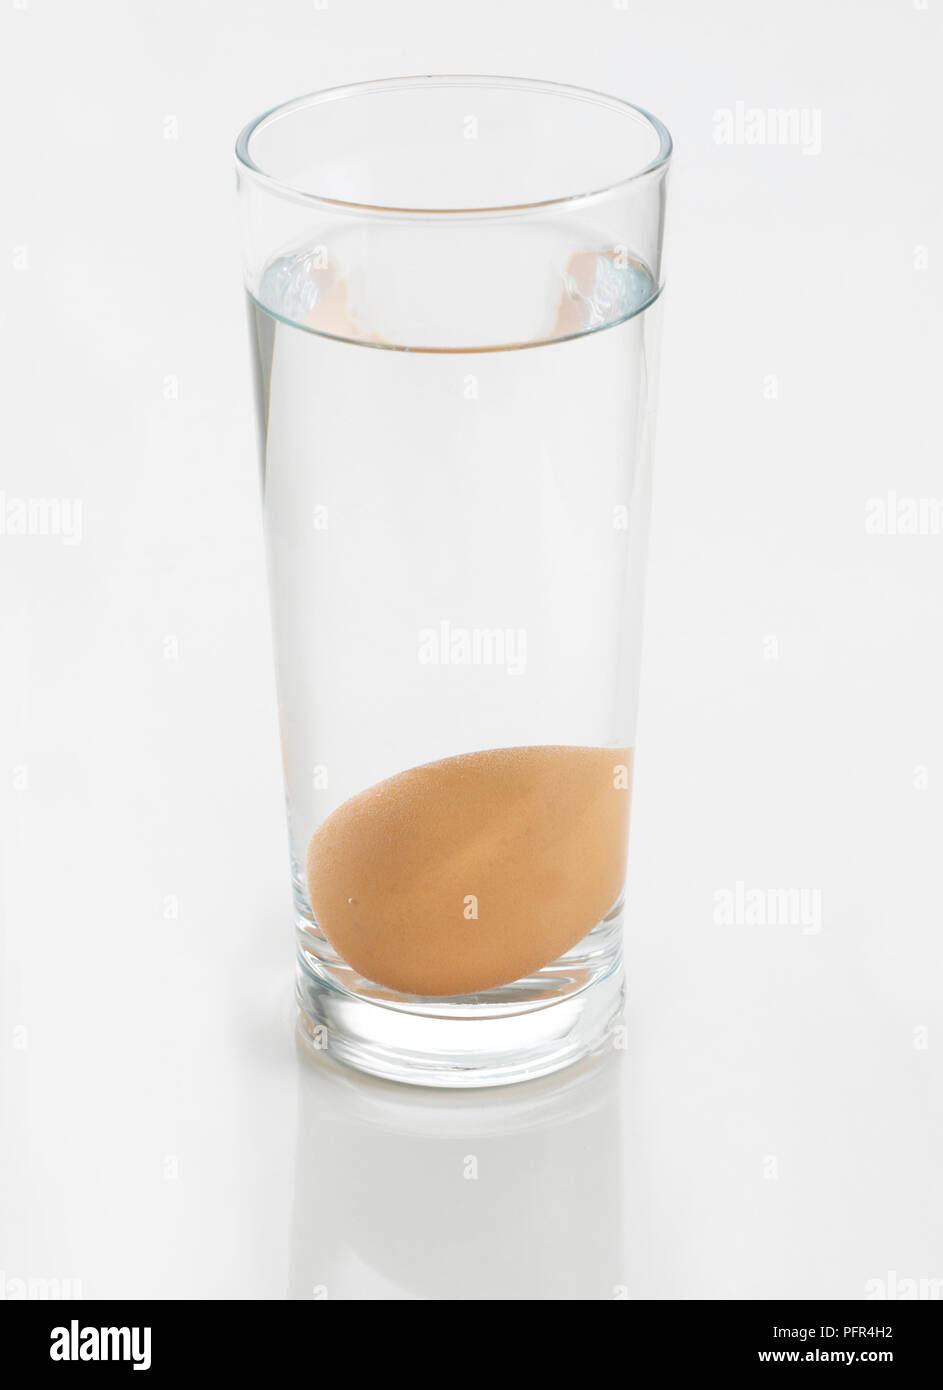 Egg Sunken To The Bottom Of Glass Of Water Sink Or Float